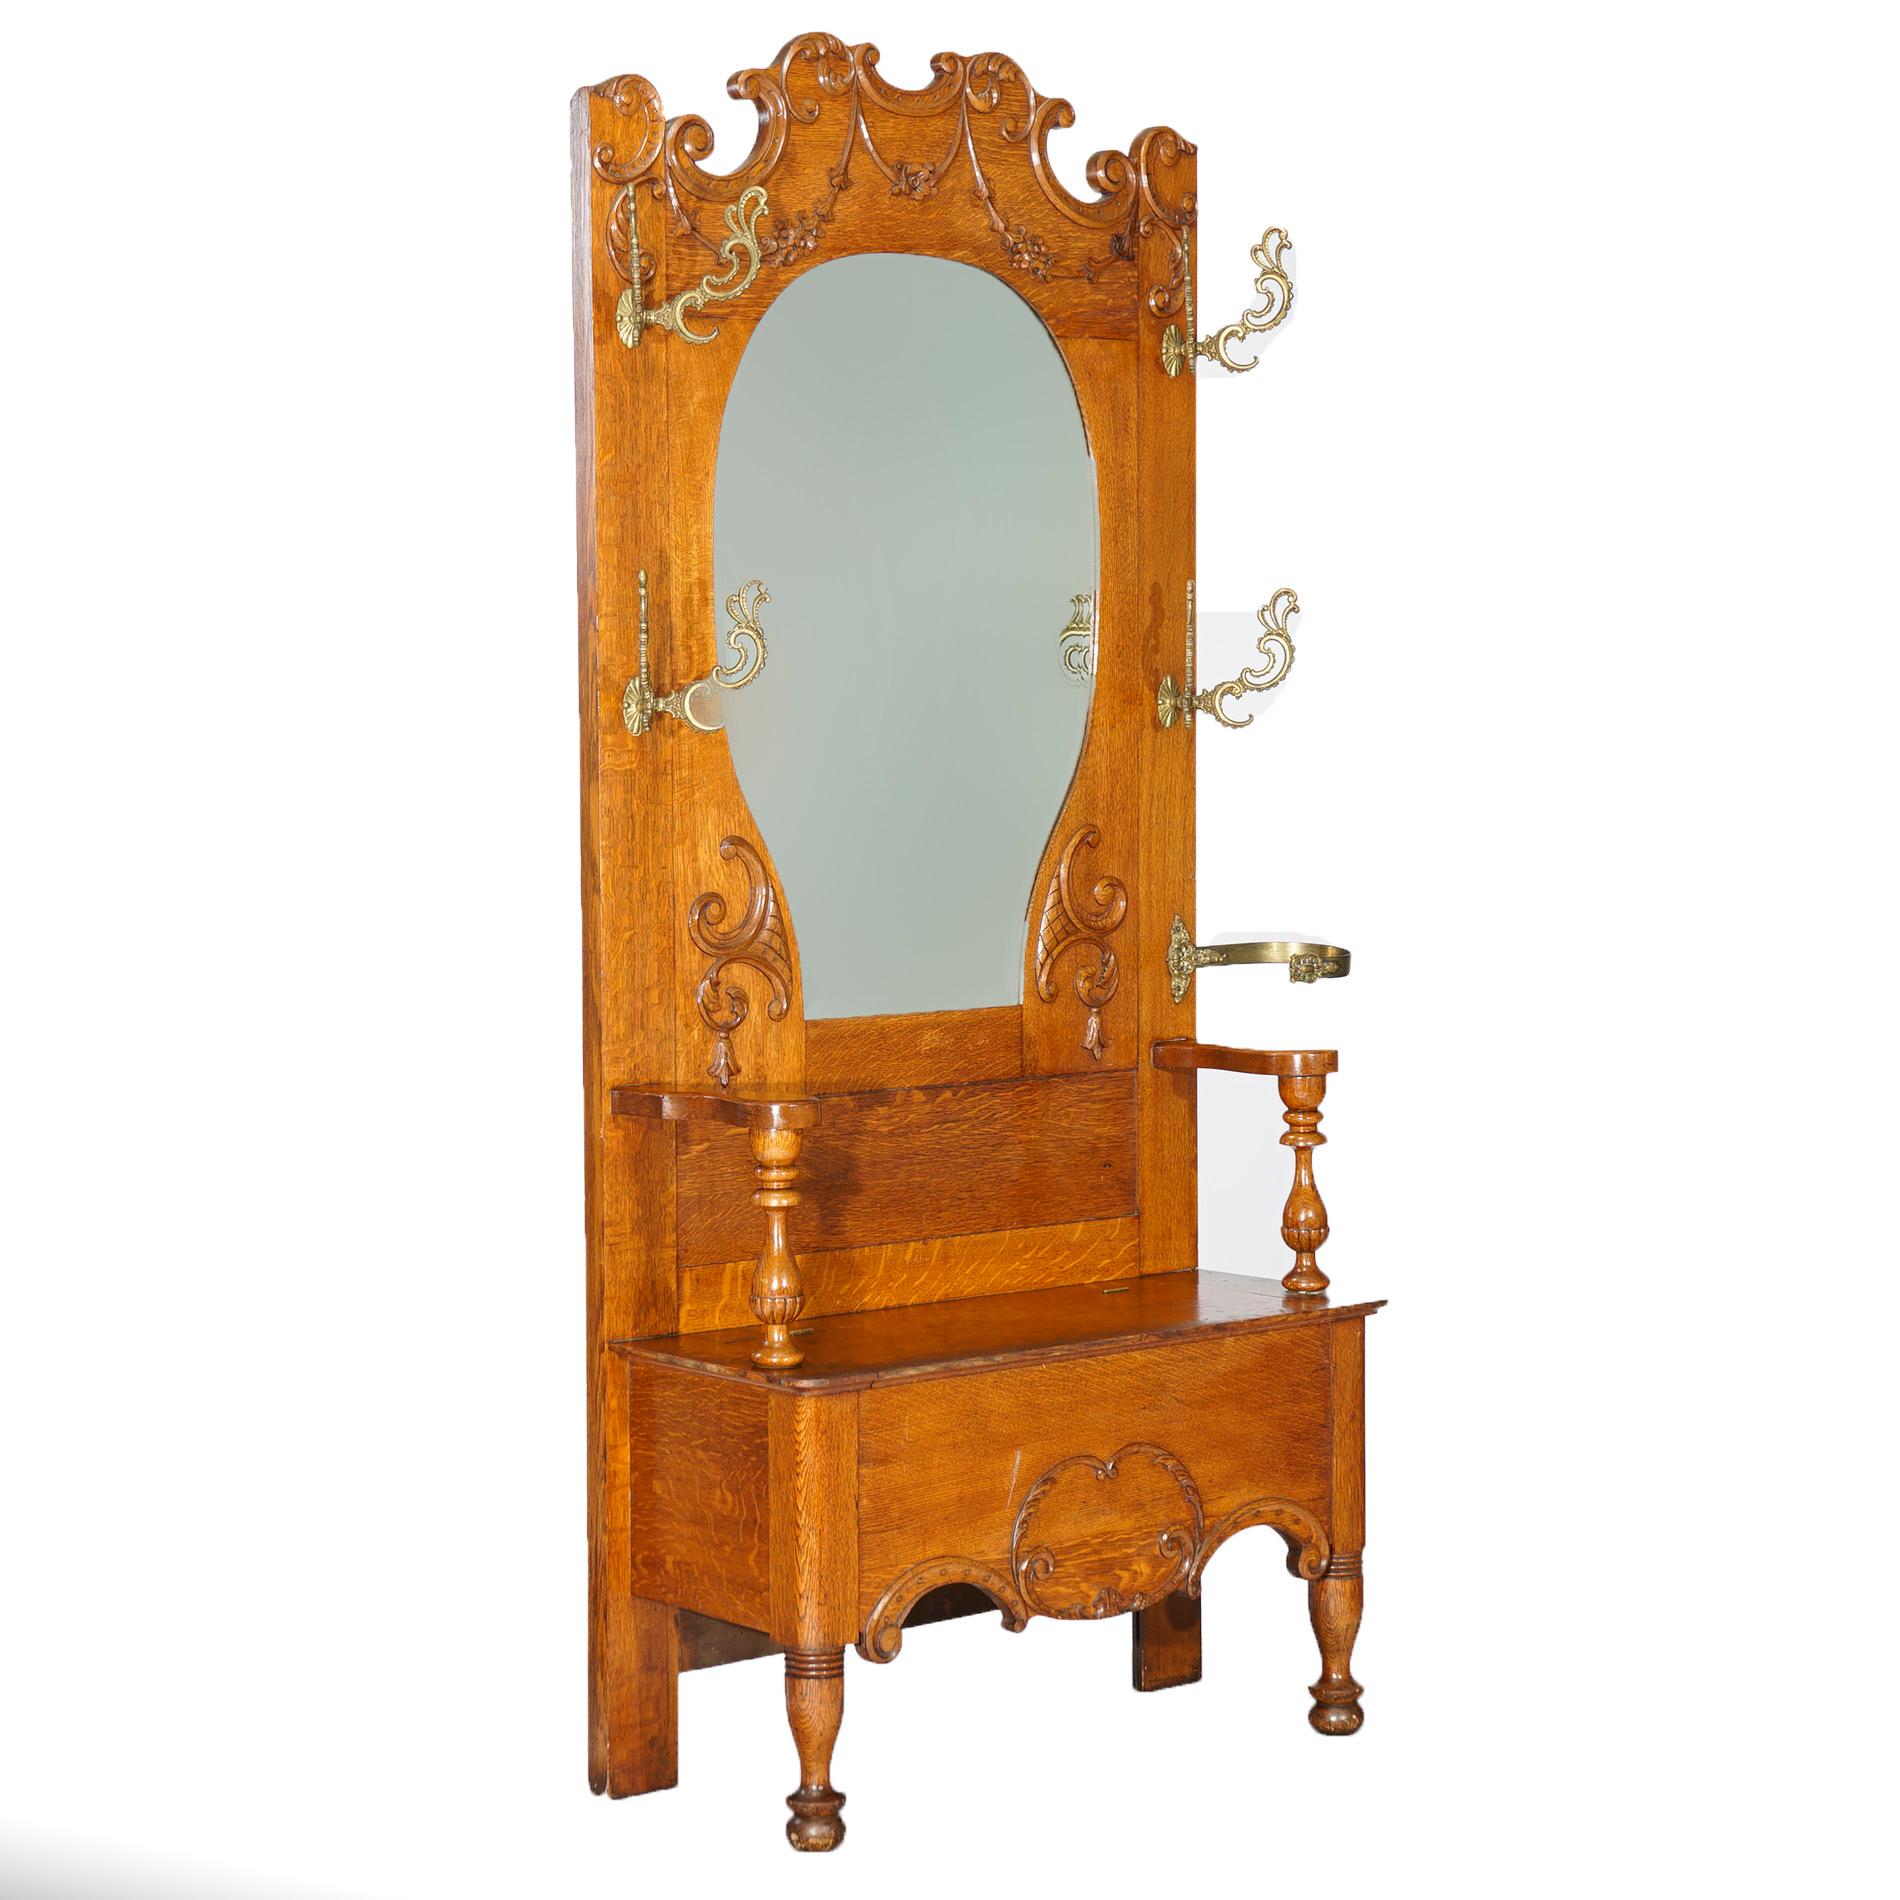 An antique hall seat attributed to RJ Horner offers golden oak construction with shaped crest having carved scroll and foliate elements over beveled mirror in horse show form, seat with lift top, c1900.

Measures - 79.5''H x 44.25''W x 15.5''D; 21''